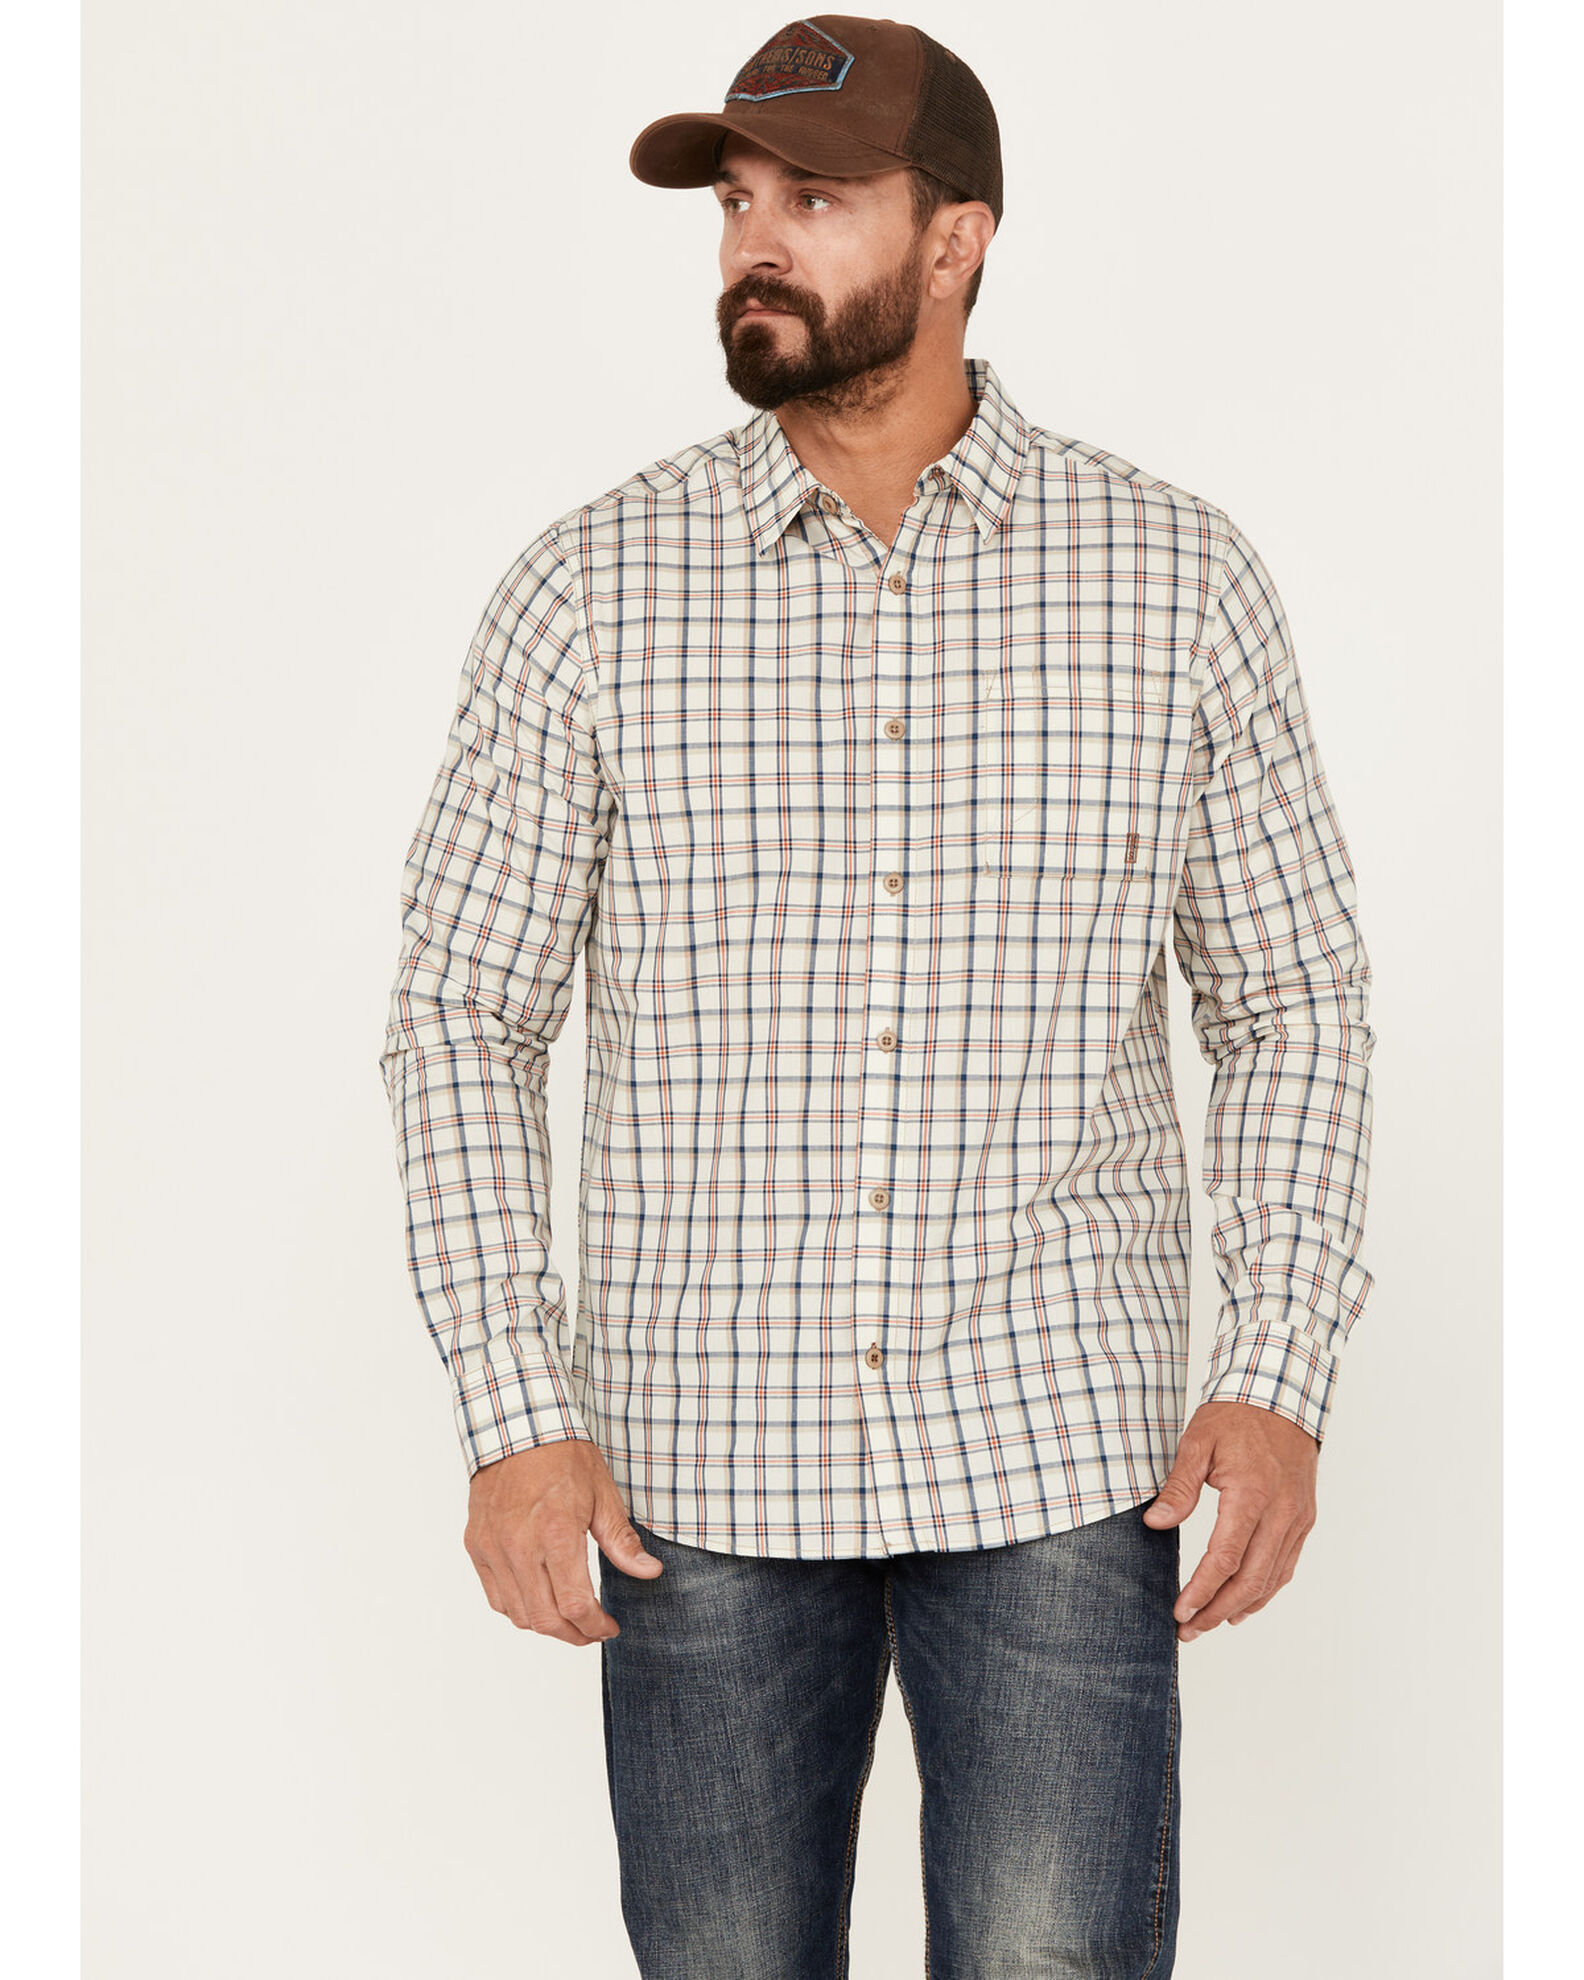 Brothers & Sons Men's Plaid Long Sleeve Button-Down Western Shirt